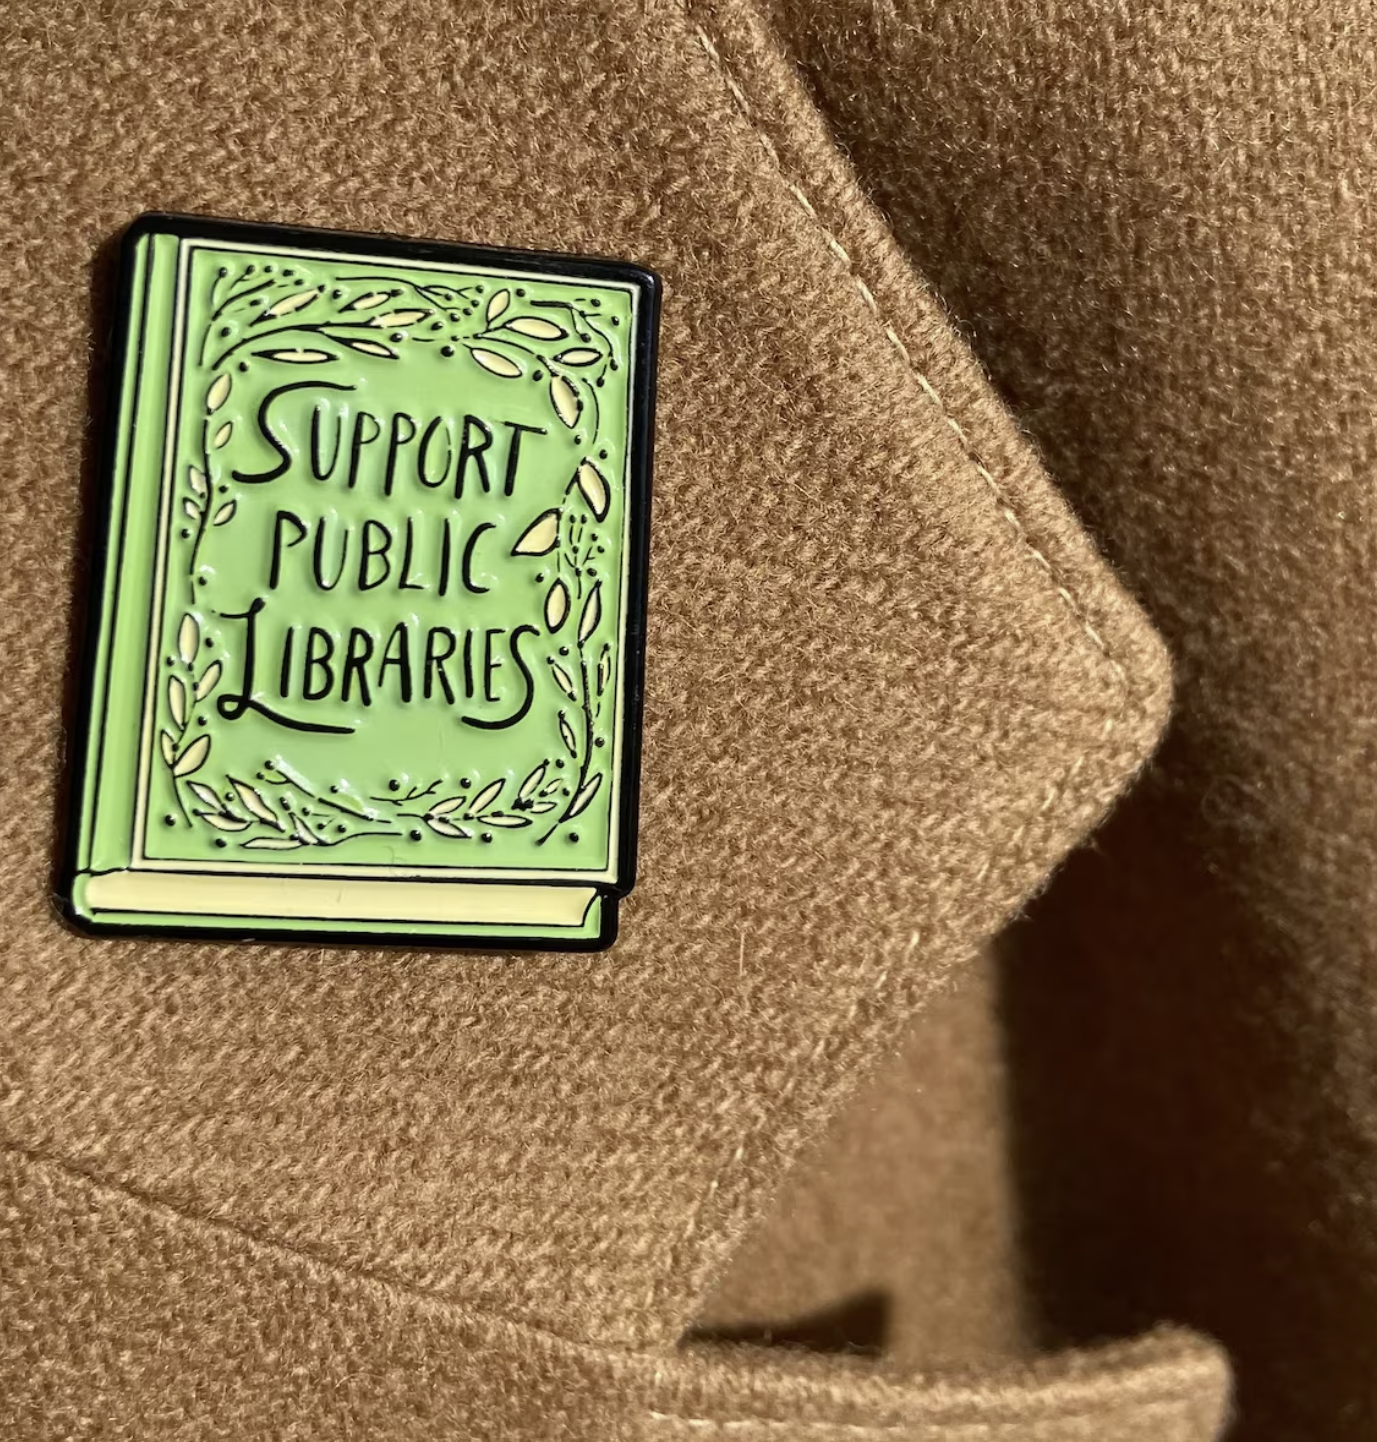 Lime Green enamel pin in the shape of a book with decorative leafy border around the edges and the text "support public libraries" is swirly font